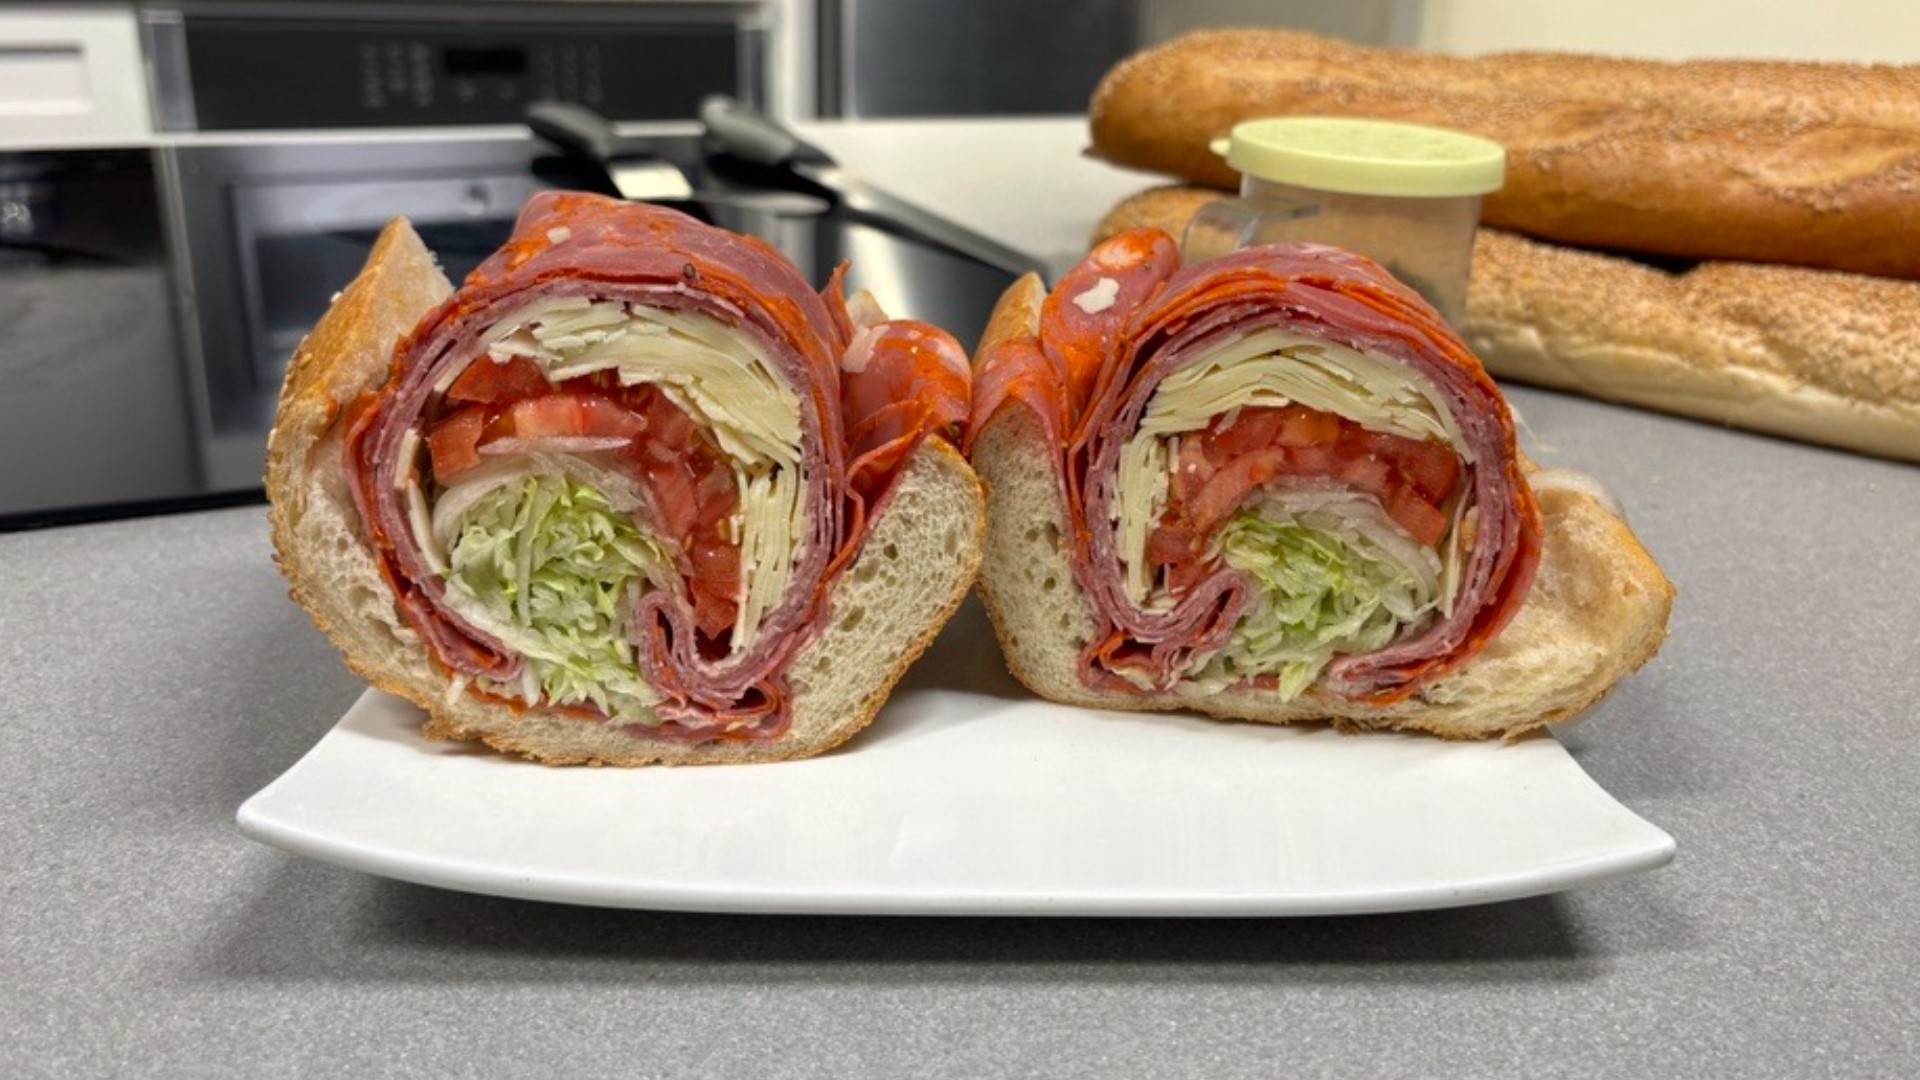 Hefty Lefty's Hoagies and Grinders recently blew up on social media when a customer posted a photo of their sandwich on a hoagie enthusiast Facebook group.